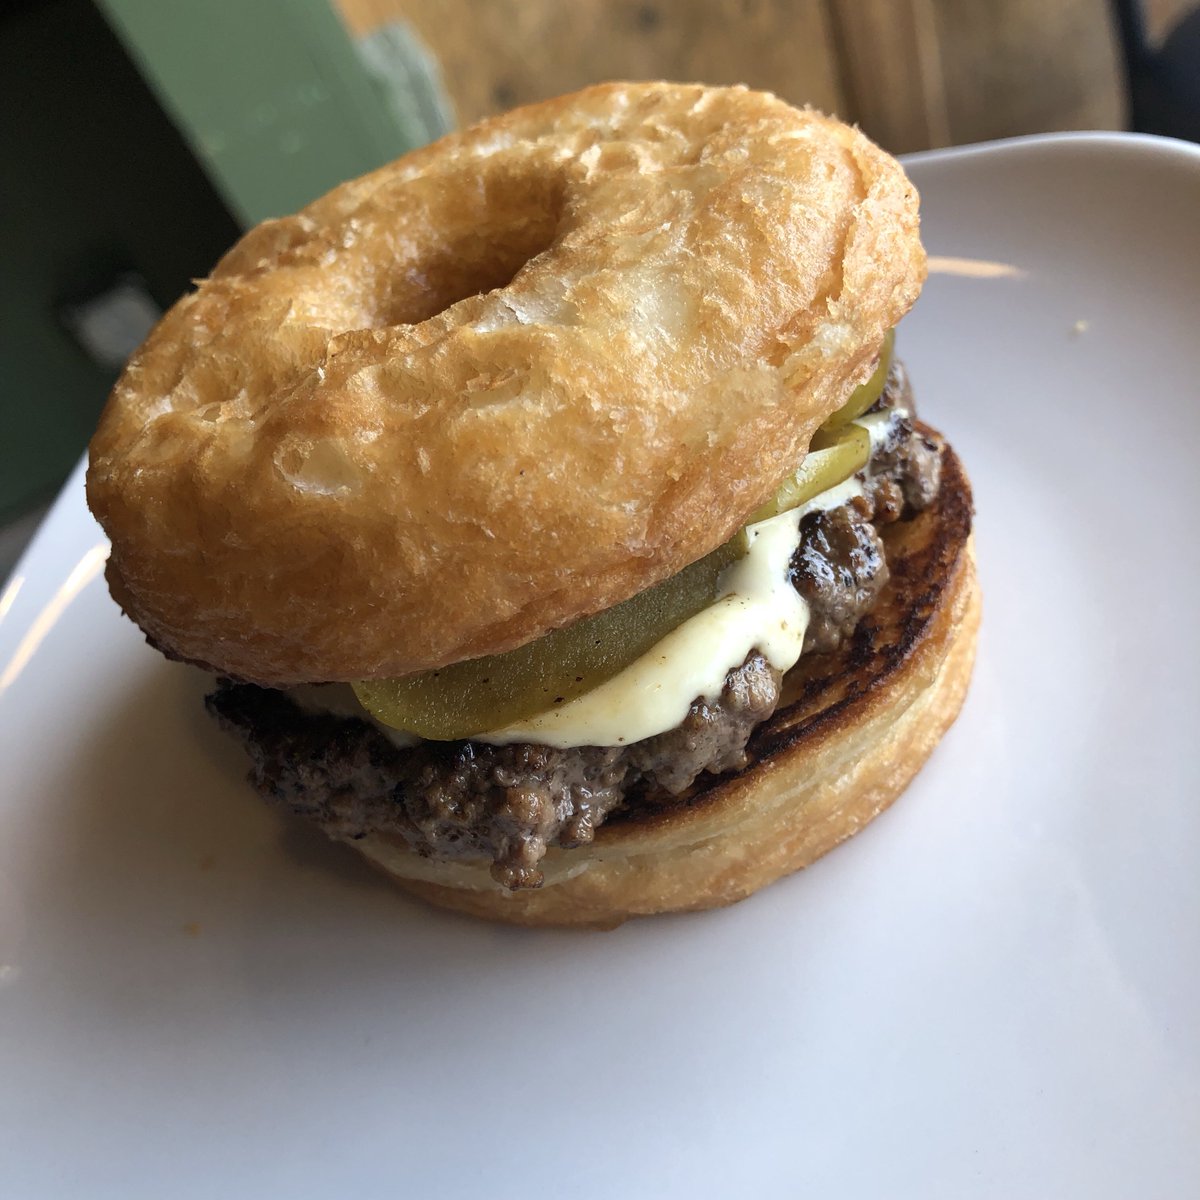 Also this weekend only I Milwaukee! Bison burger, Brie cheese, rum caramelized apples, served on a cronut. Here til it’s not.